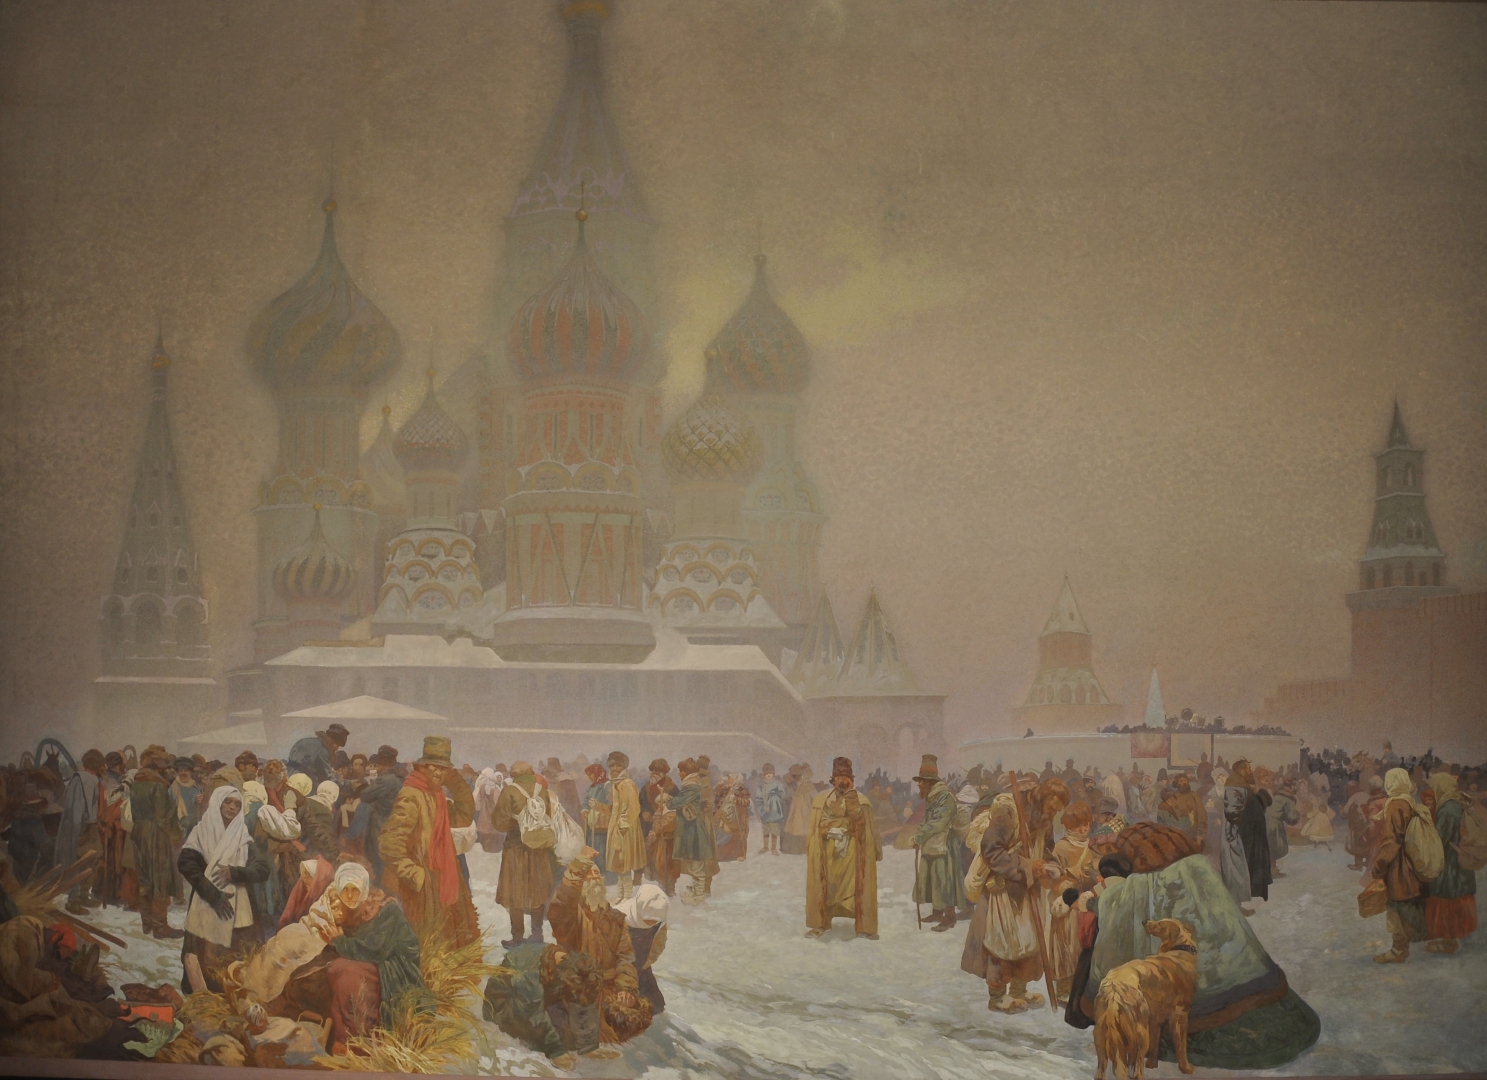 THE ABOLITION OF SERFDOM IN RUSSIA